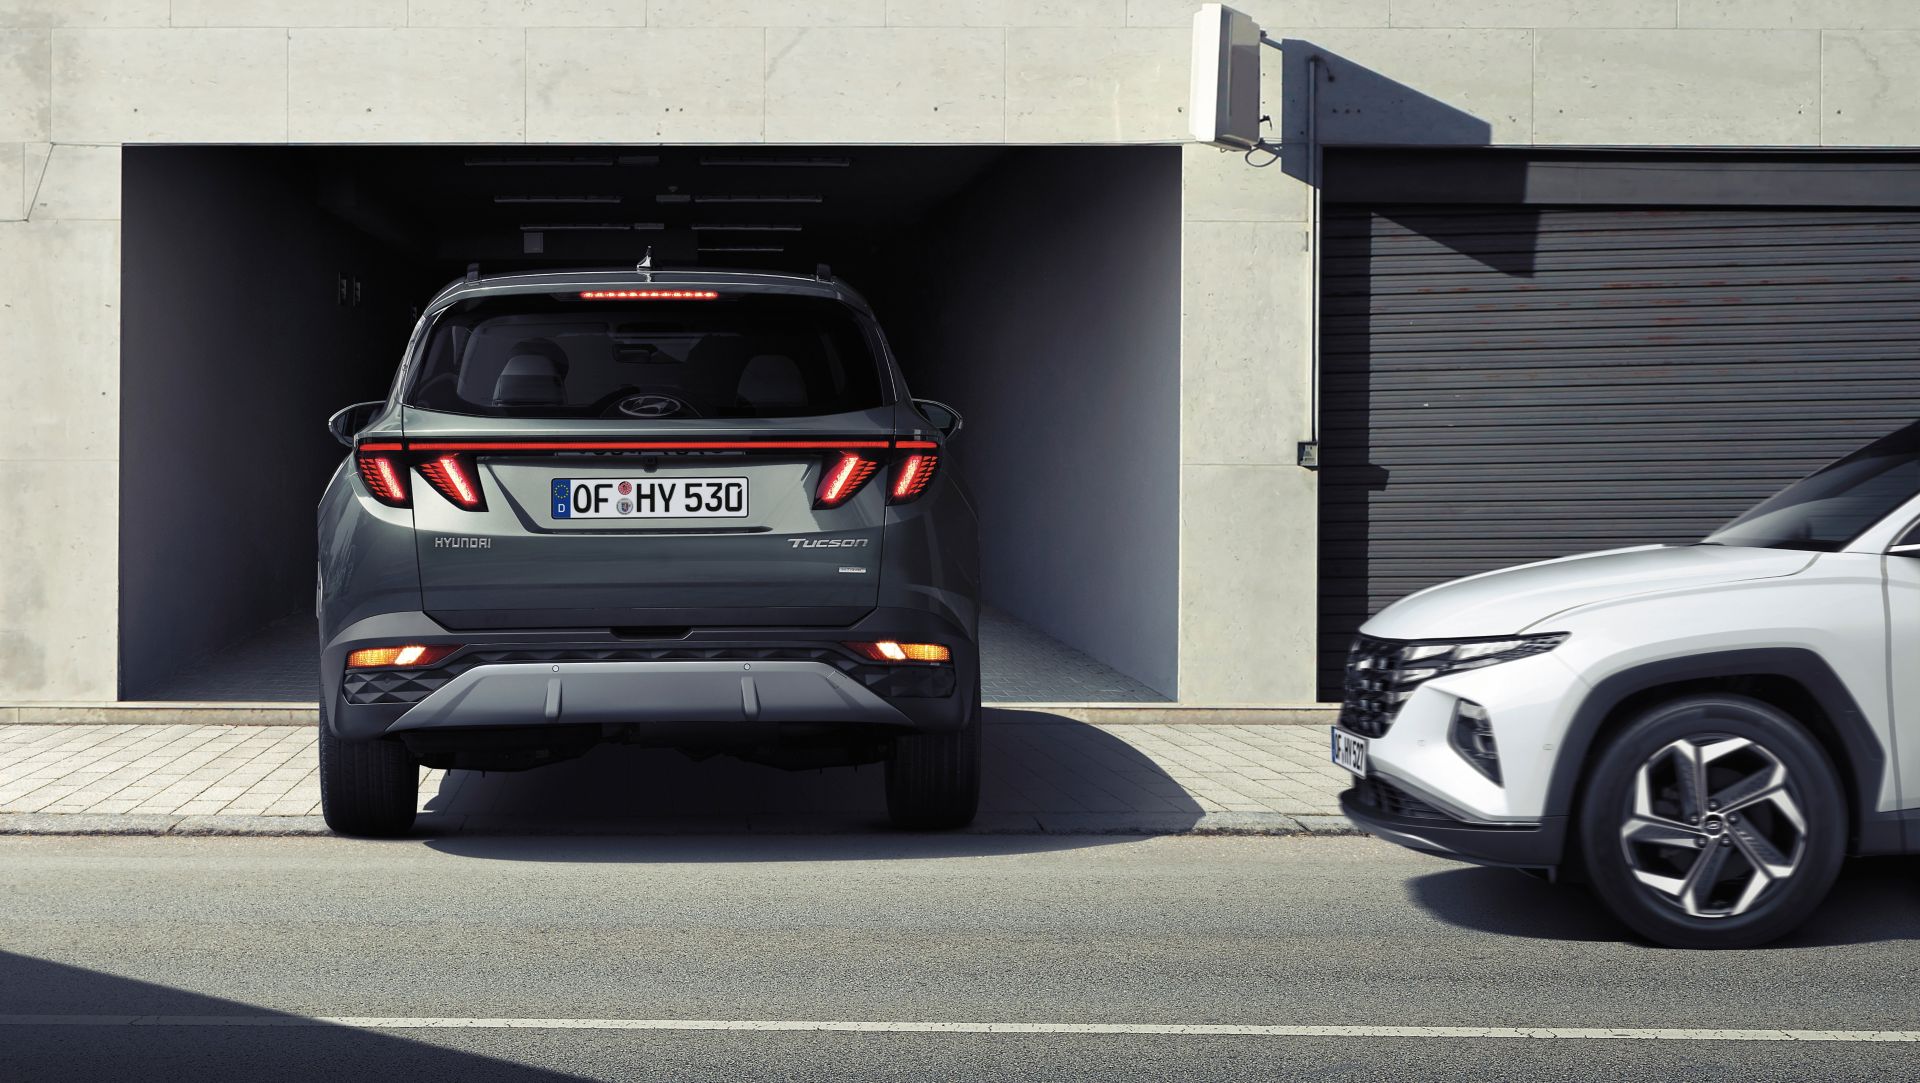 The safety and advanced driver-assistance systems of the All-New Hyundai Tucson compact SUV.